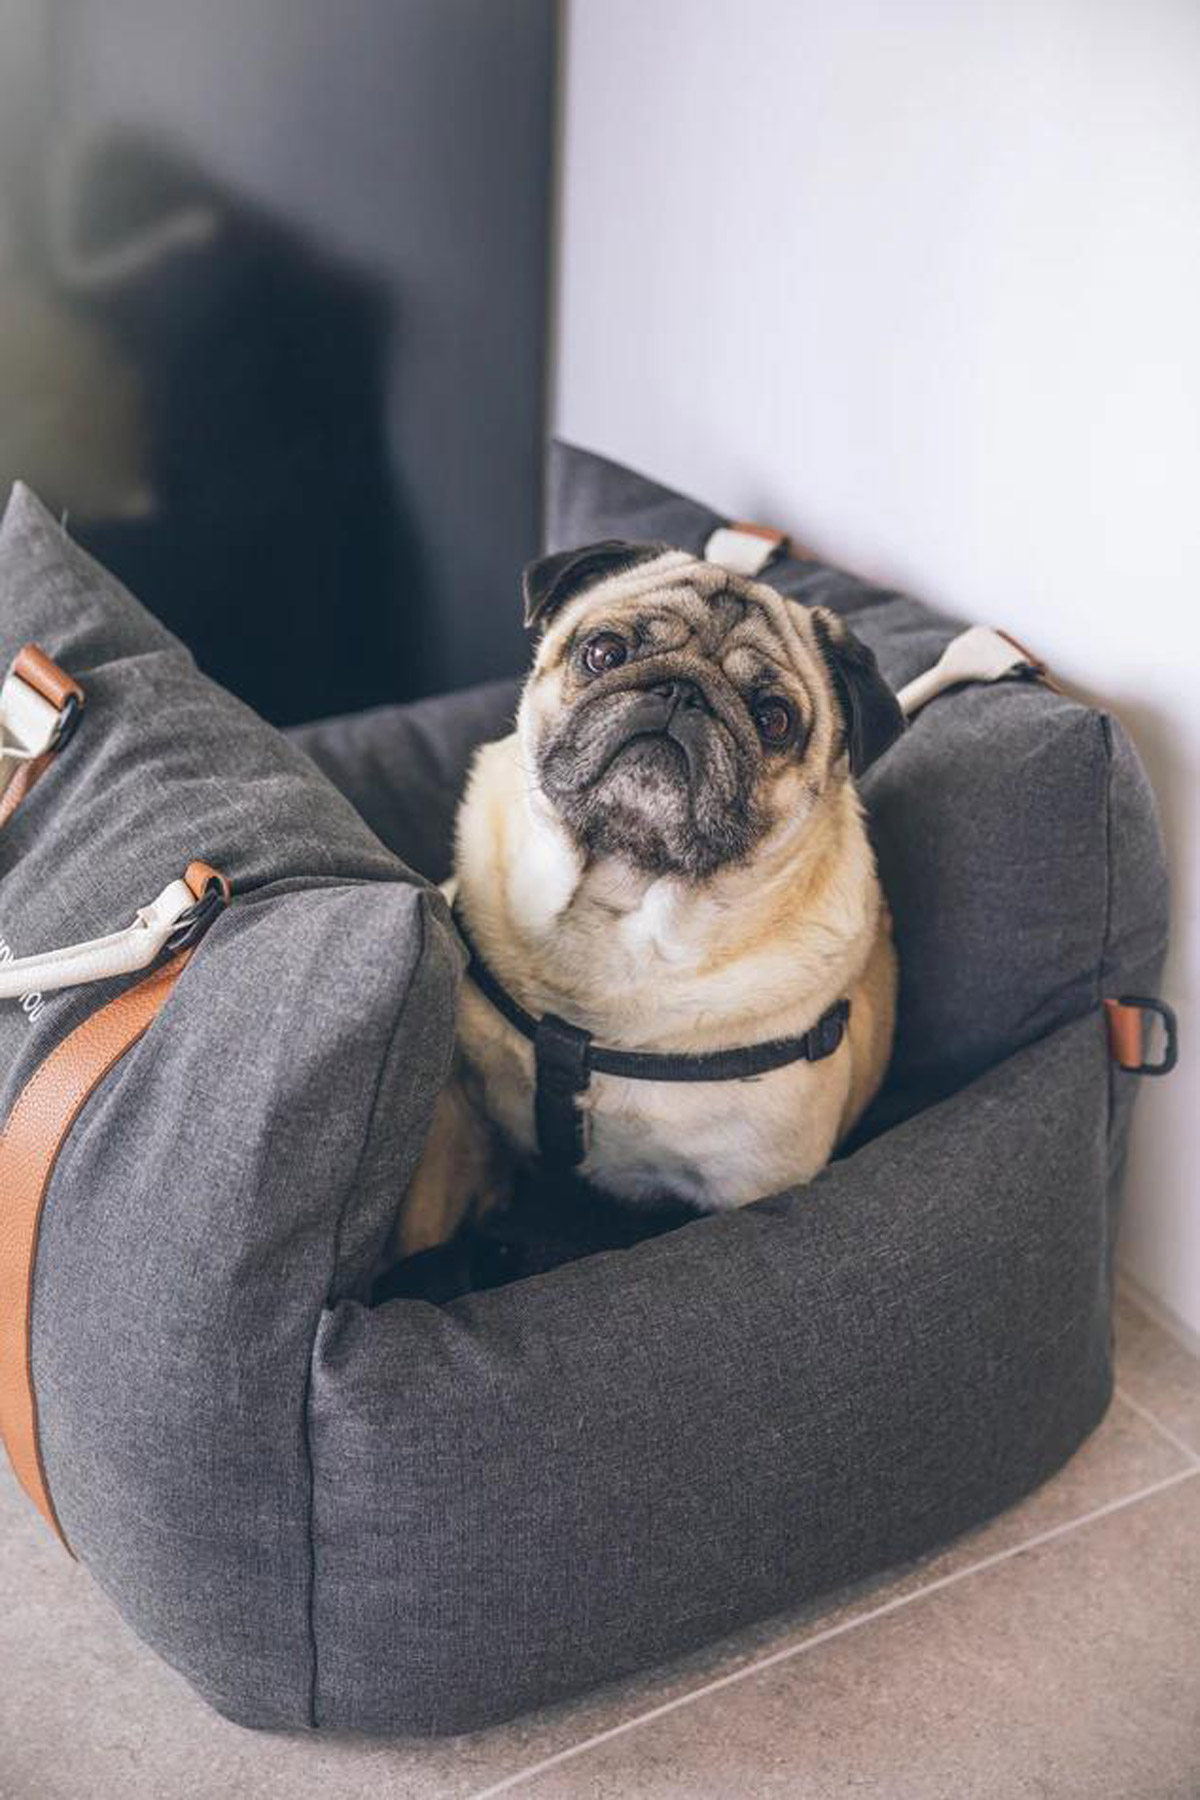 What to pack on a road trip with my dog, what to pack for a car ride with a dog, car necessities for a dog, pet necessities for a car ride